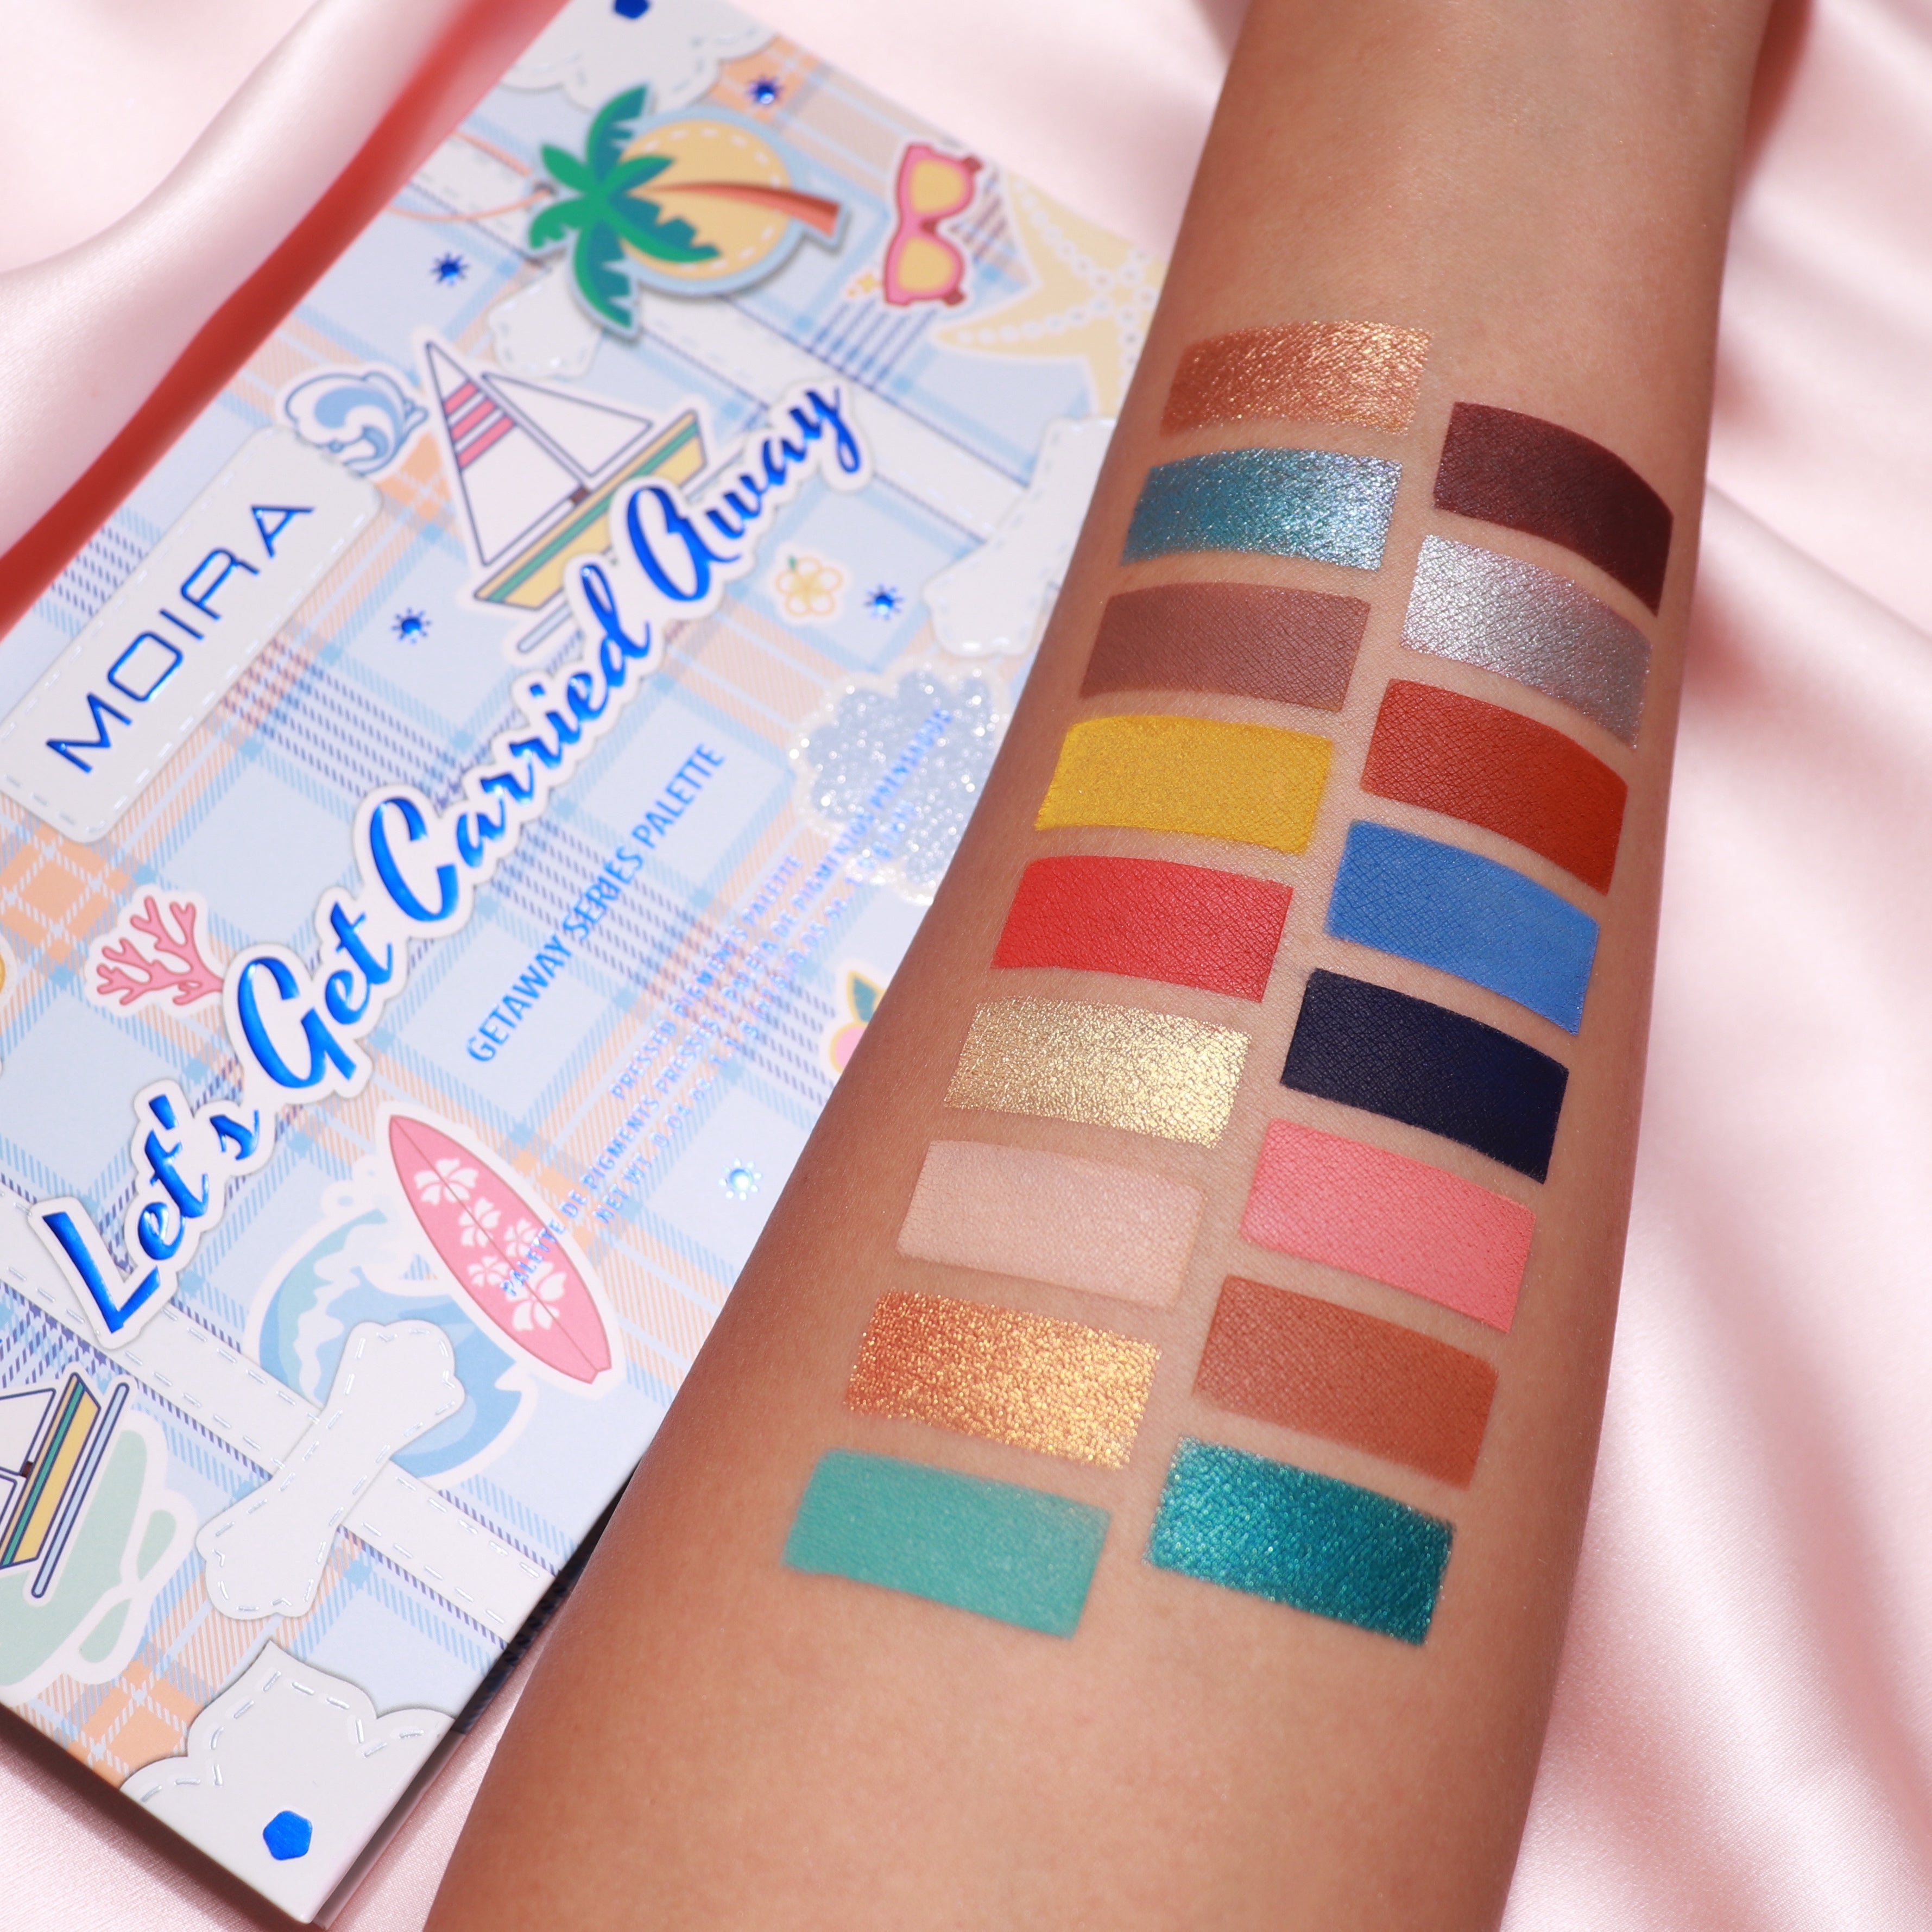 Let's Get Carried Away Palette